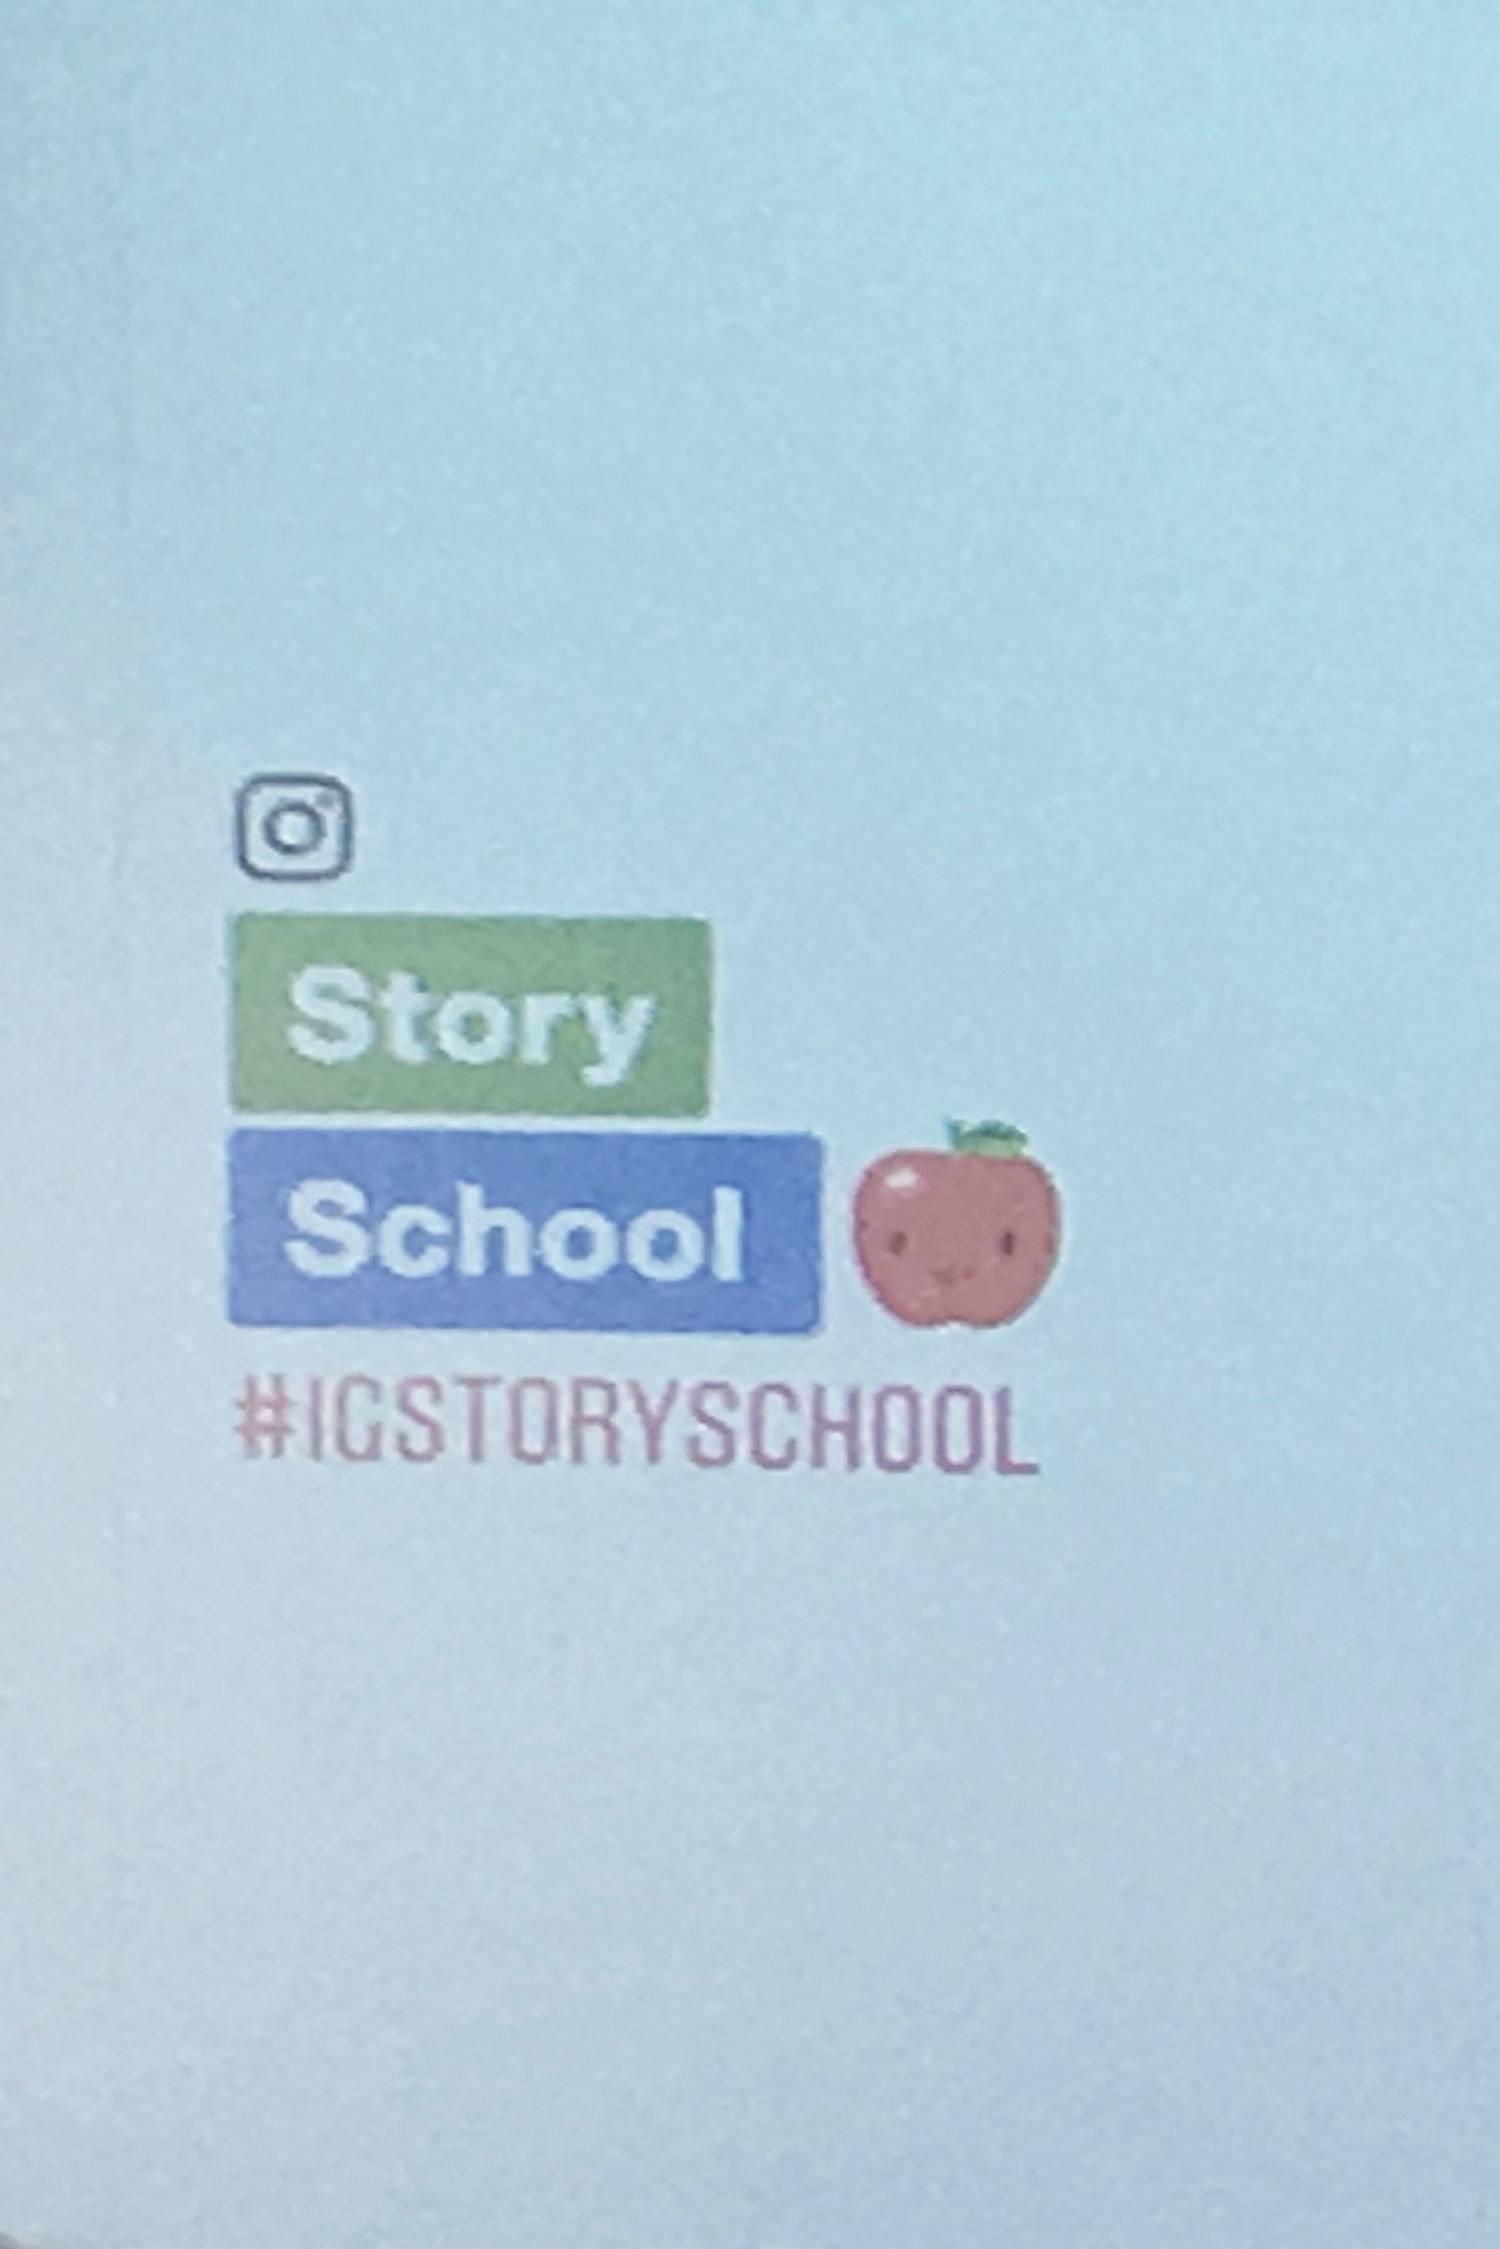 IG Story school tips and tricks